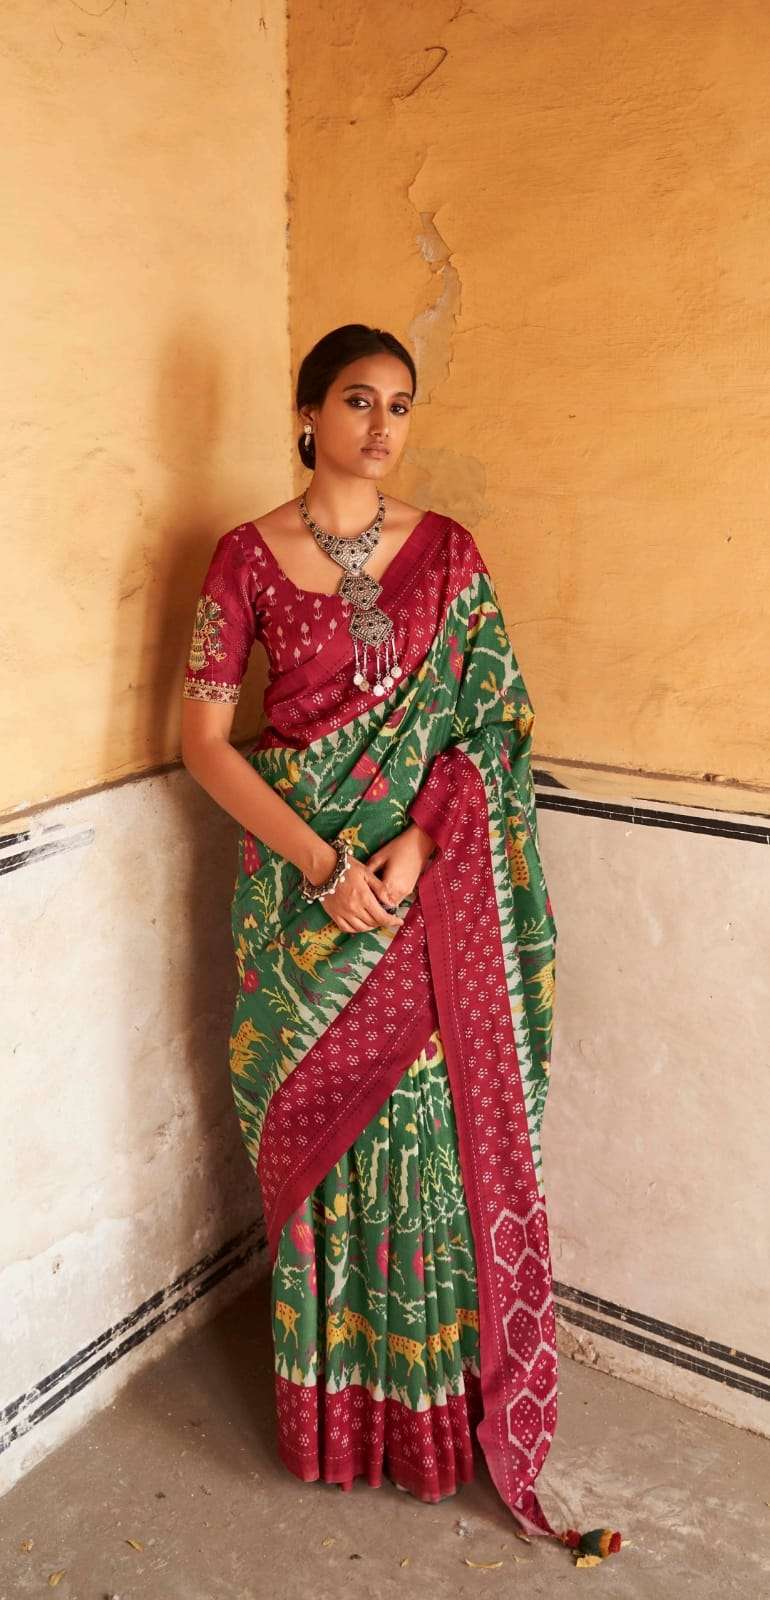 Jiyana By Kimora Fashion 2086 To 2090 Series Indian Traditional Wear Collection Beautiful Stylish Fancy Colorful Party Wear & Occasional Wear Tussar Silk Sarees At Wholesale Price